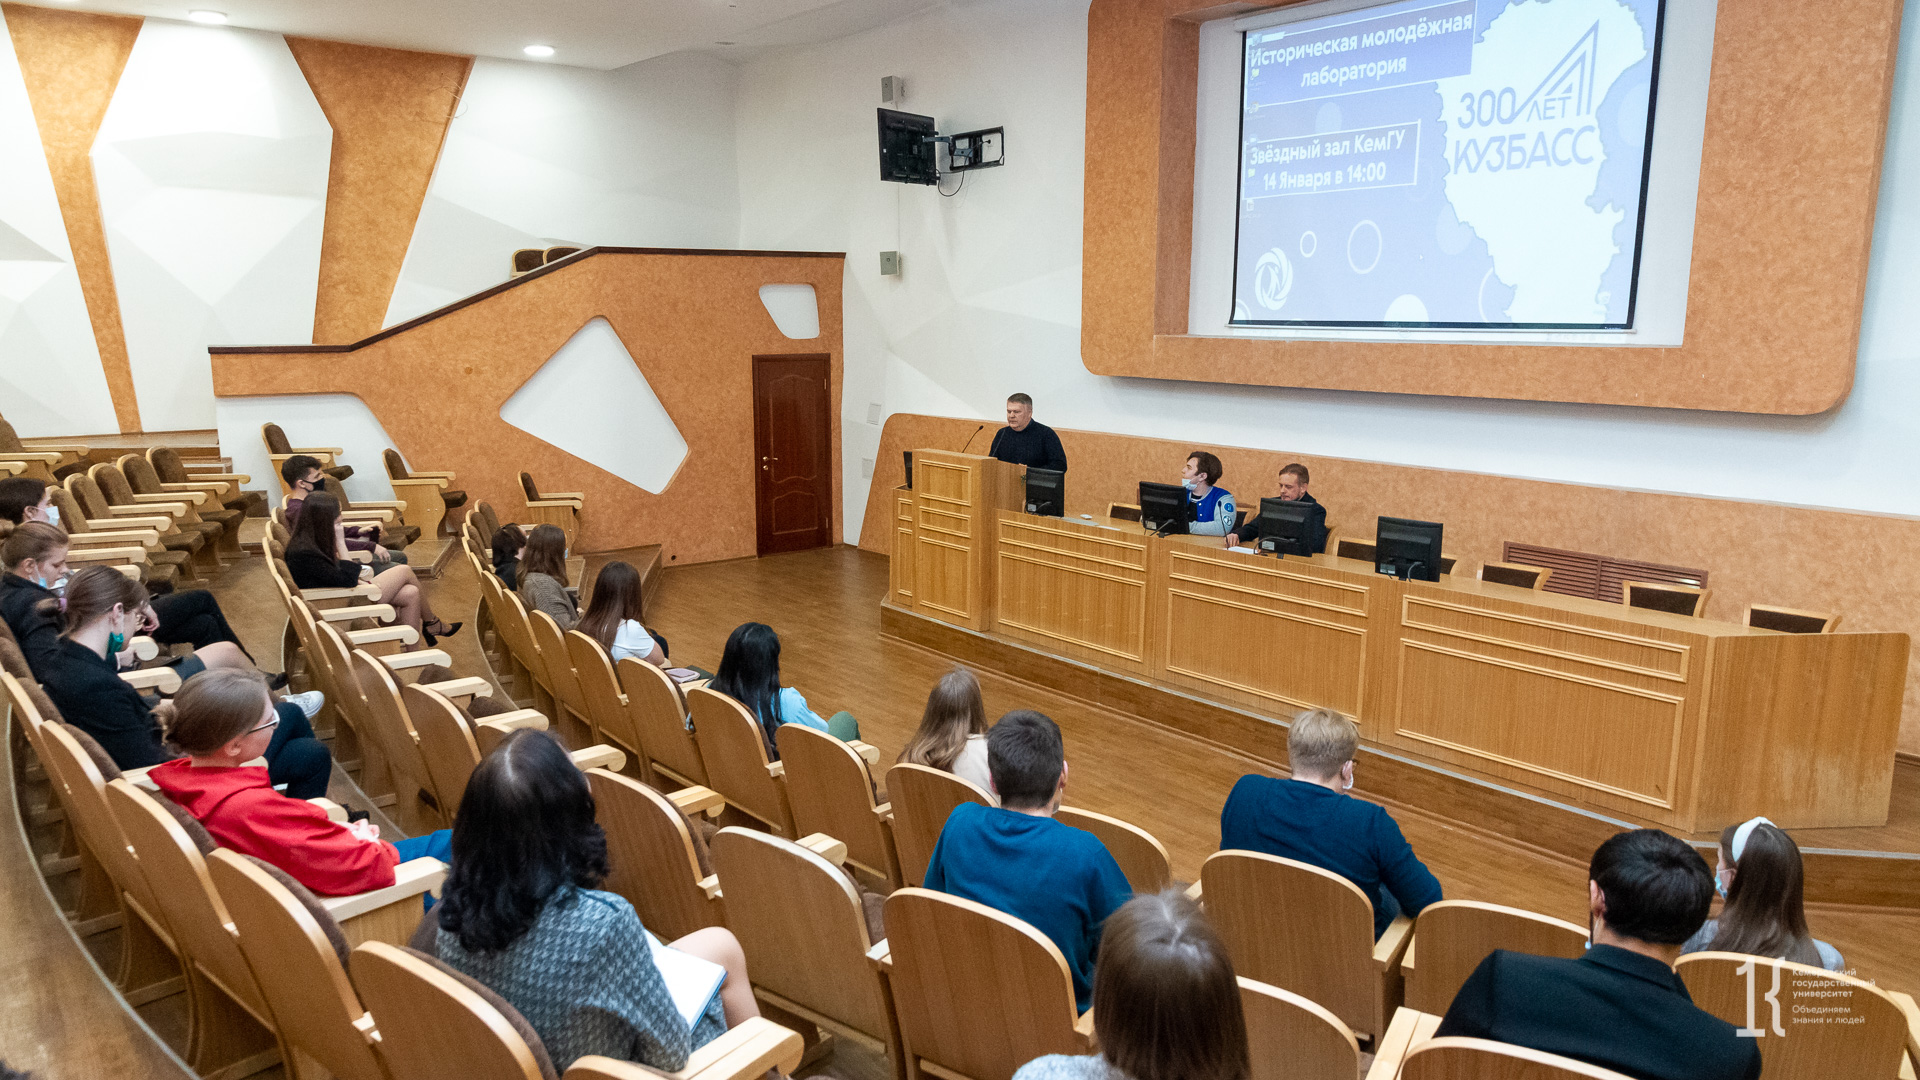 Historical Youth Laboratory has been opened at the flagship university of Kuzbass  